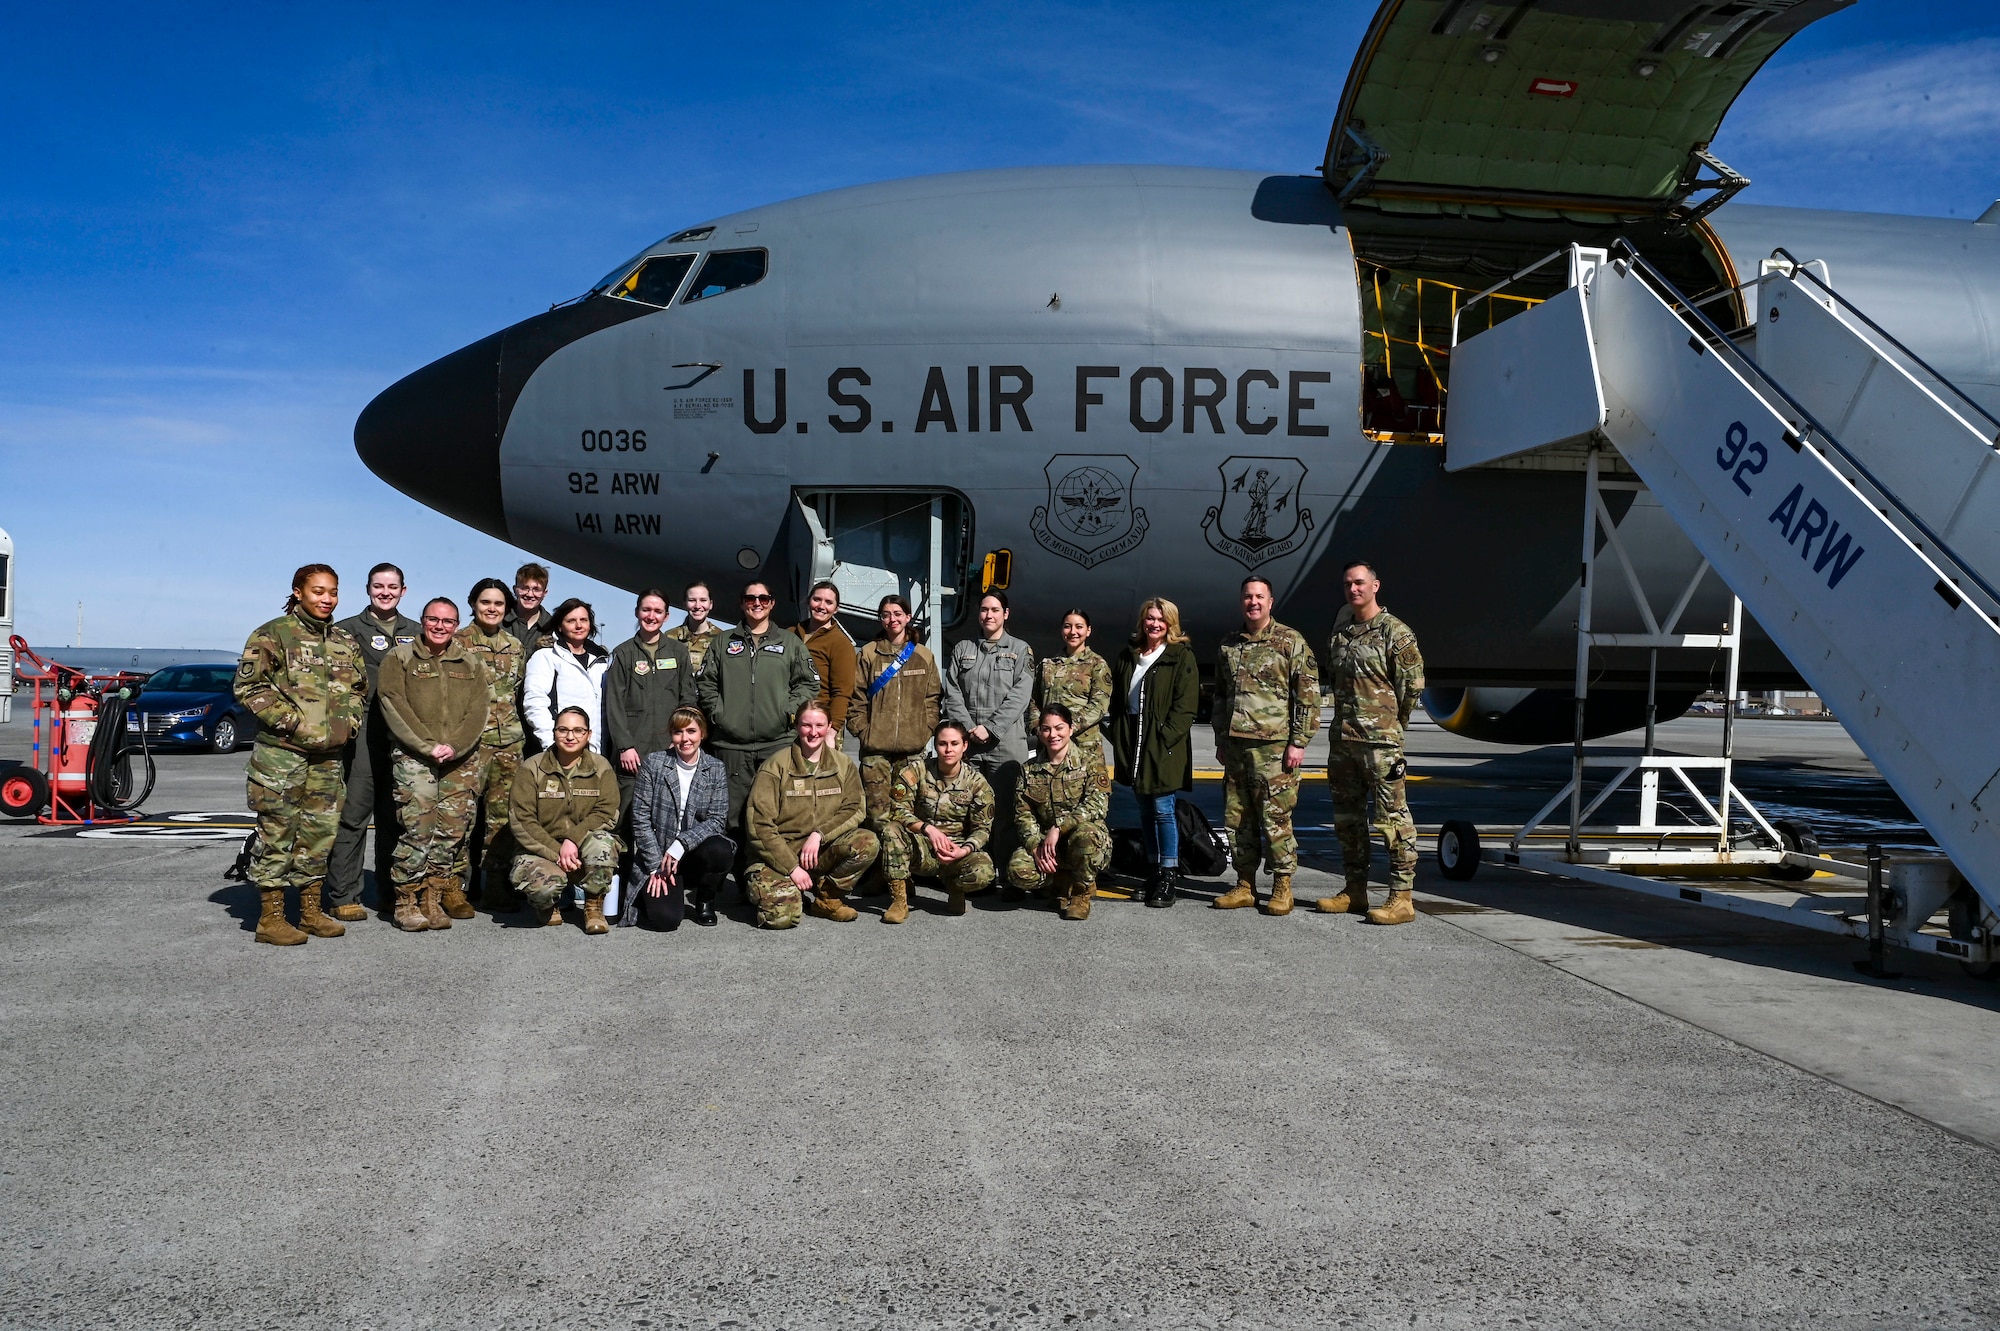 Group photo in front of KC-135